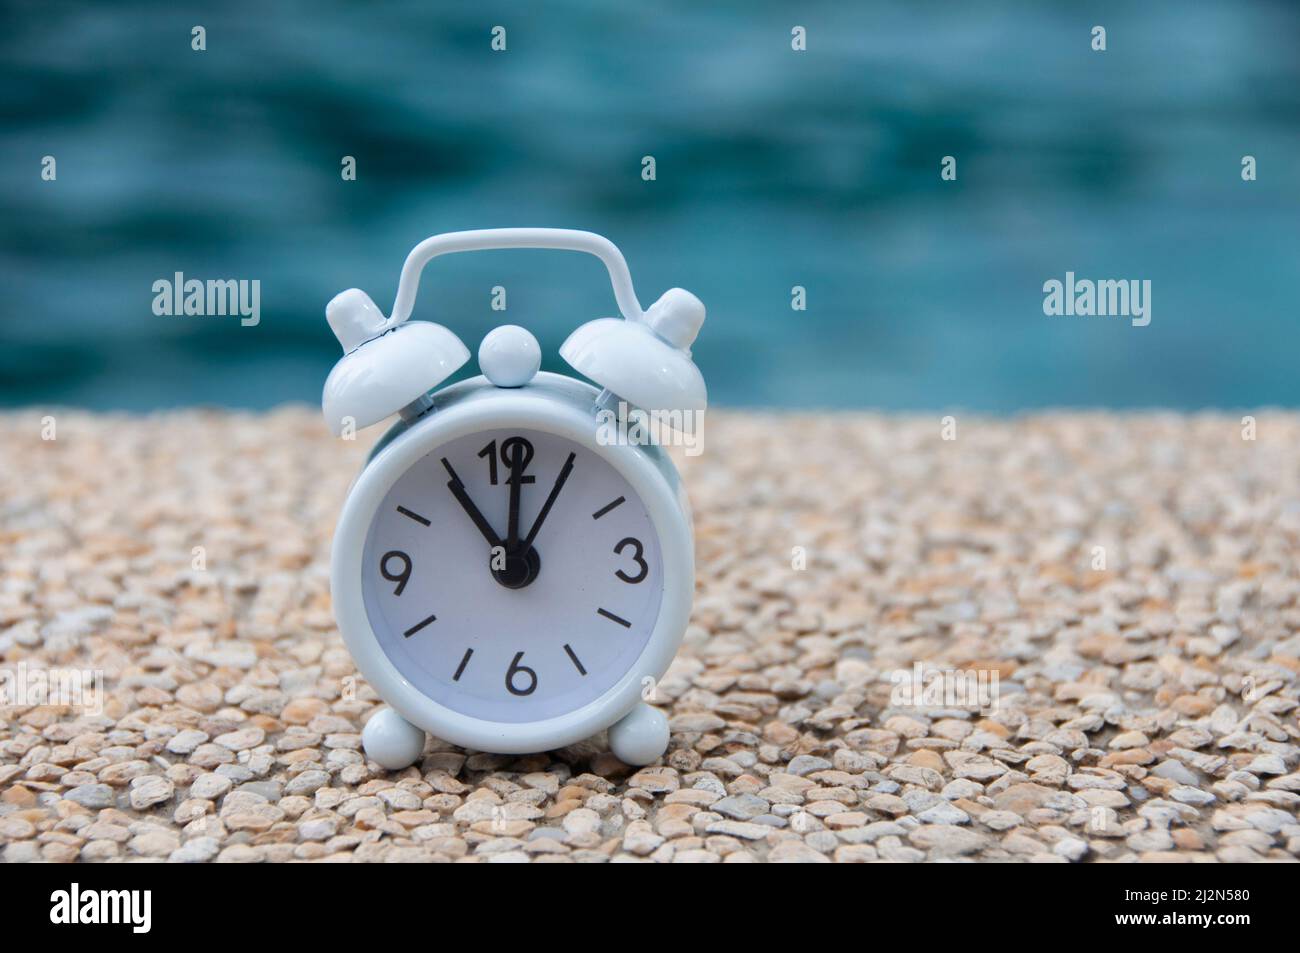 White alarm clock on marble floor with blurred swimming pool background. The clock set at 11 o'clock. Morning and deadline concept. Stock Photo